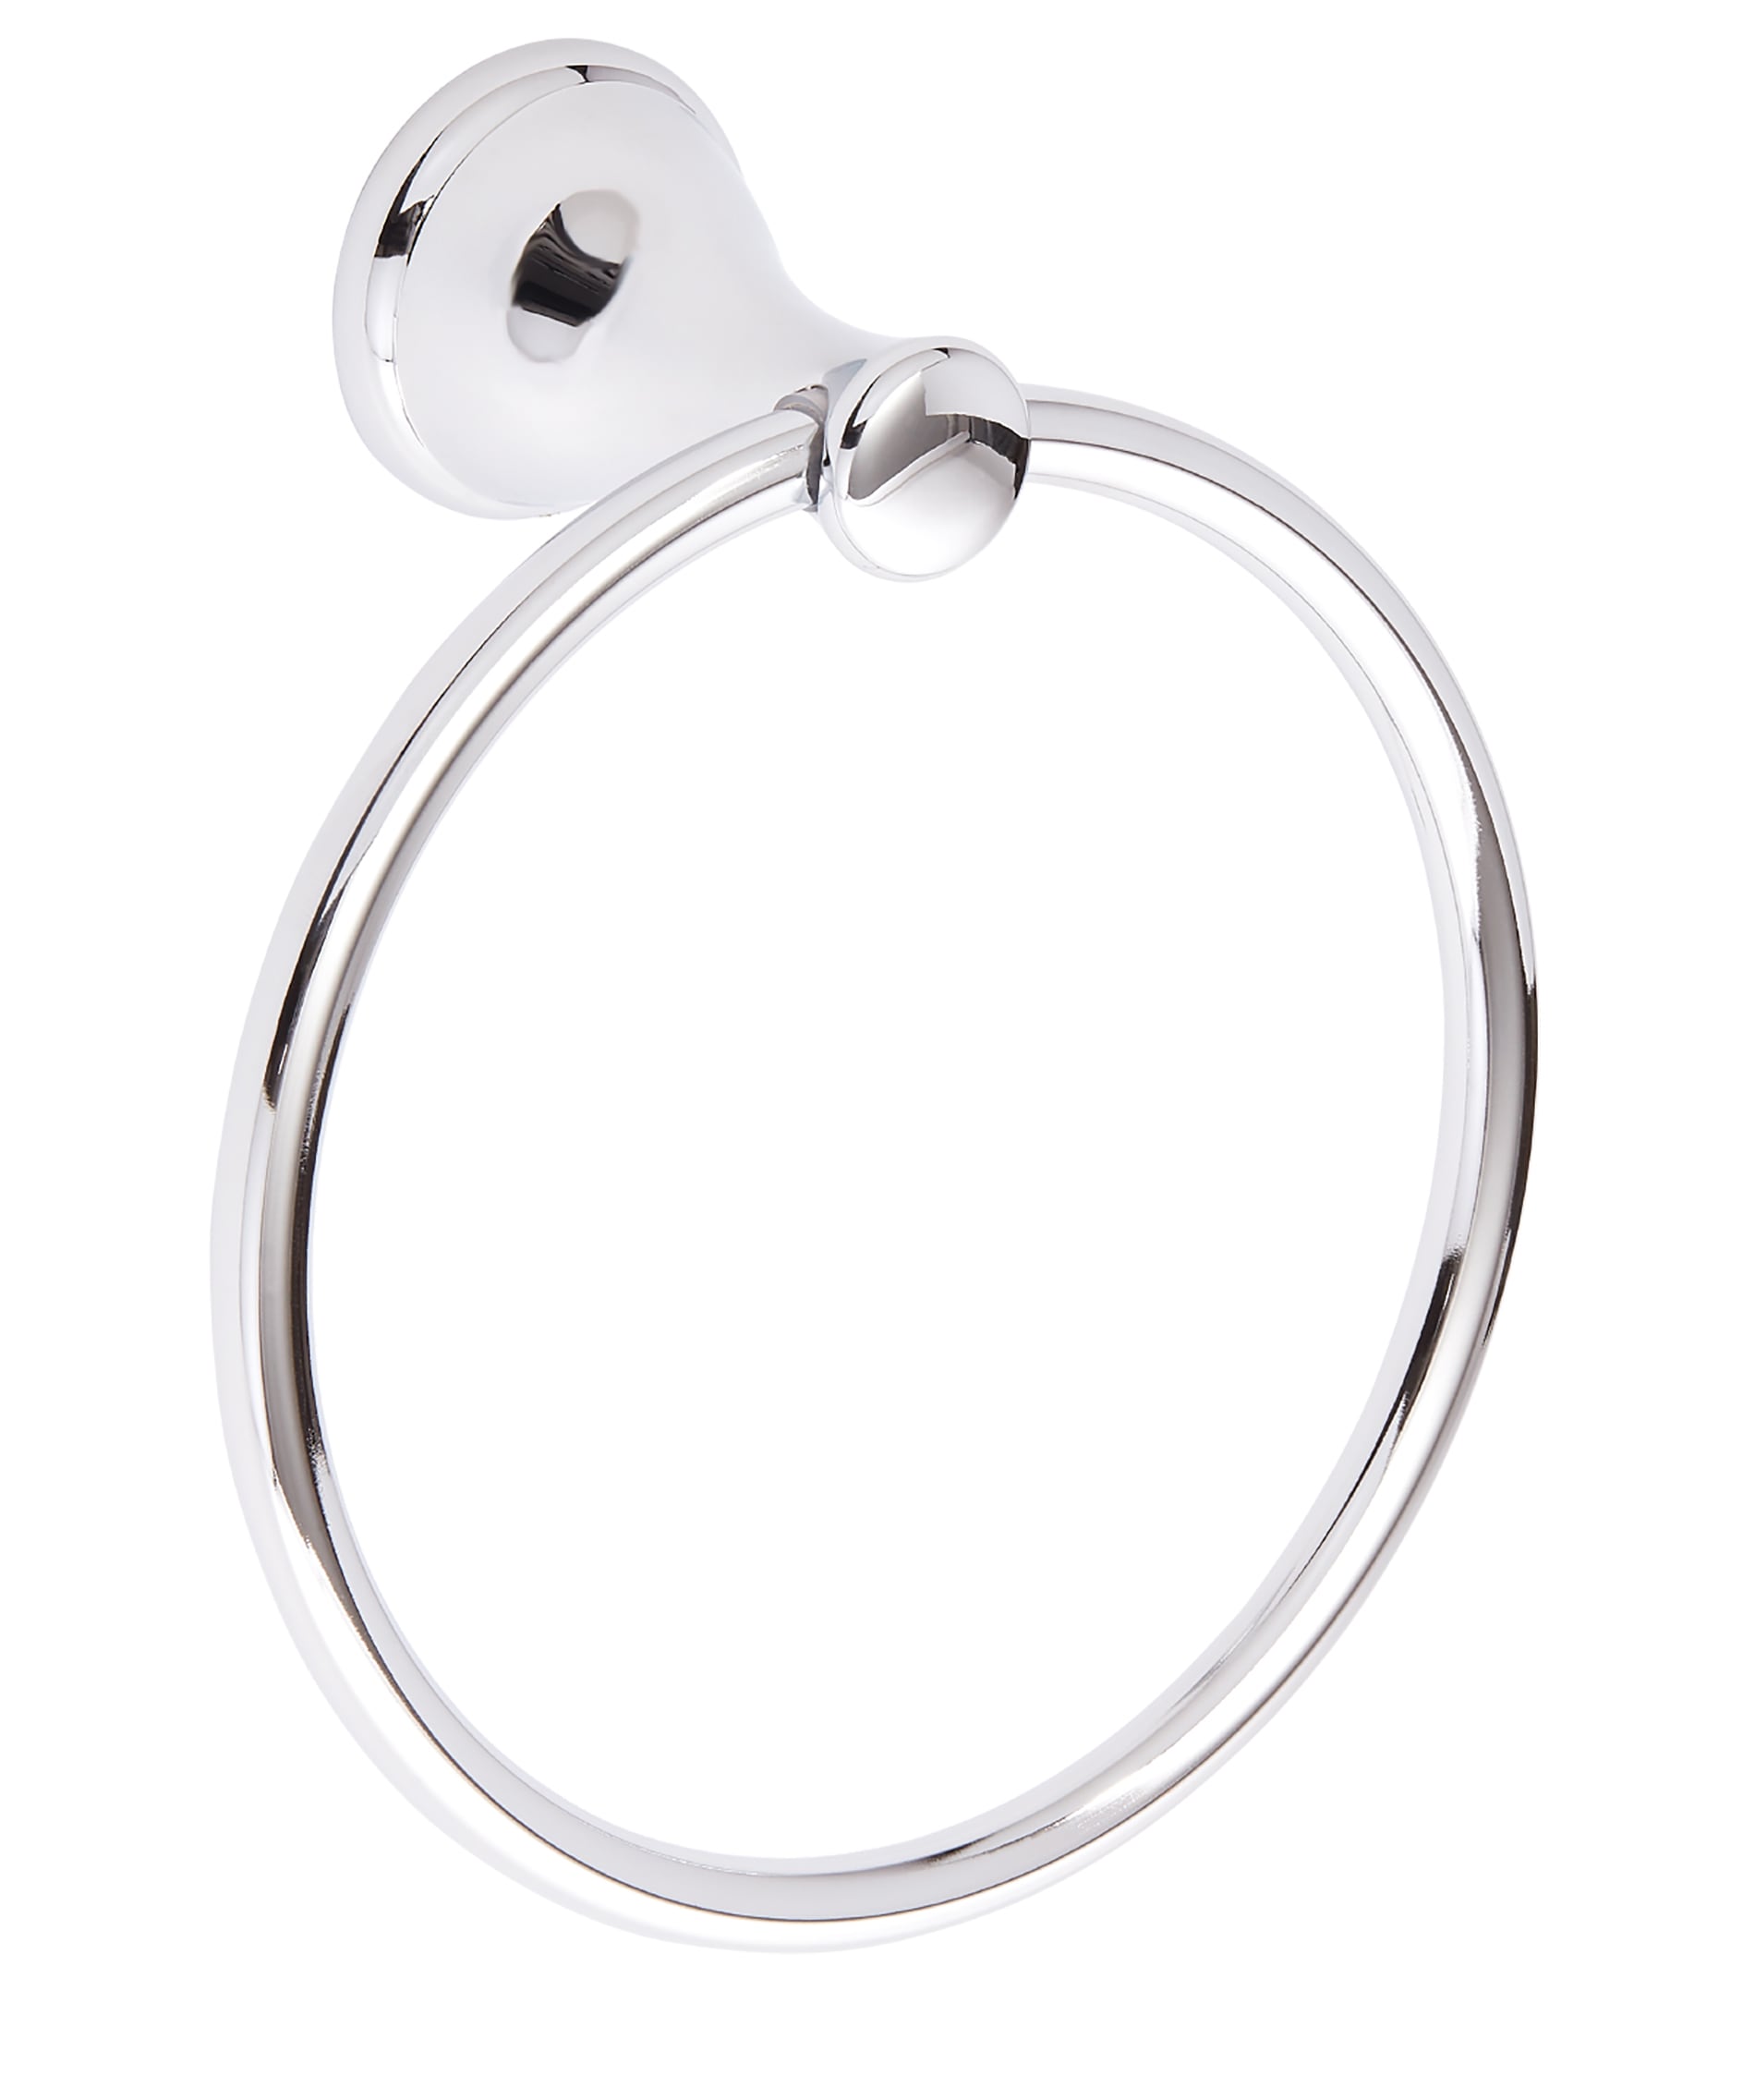 Best Applications & Placements for Towel Rings